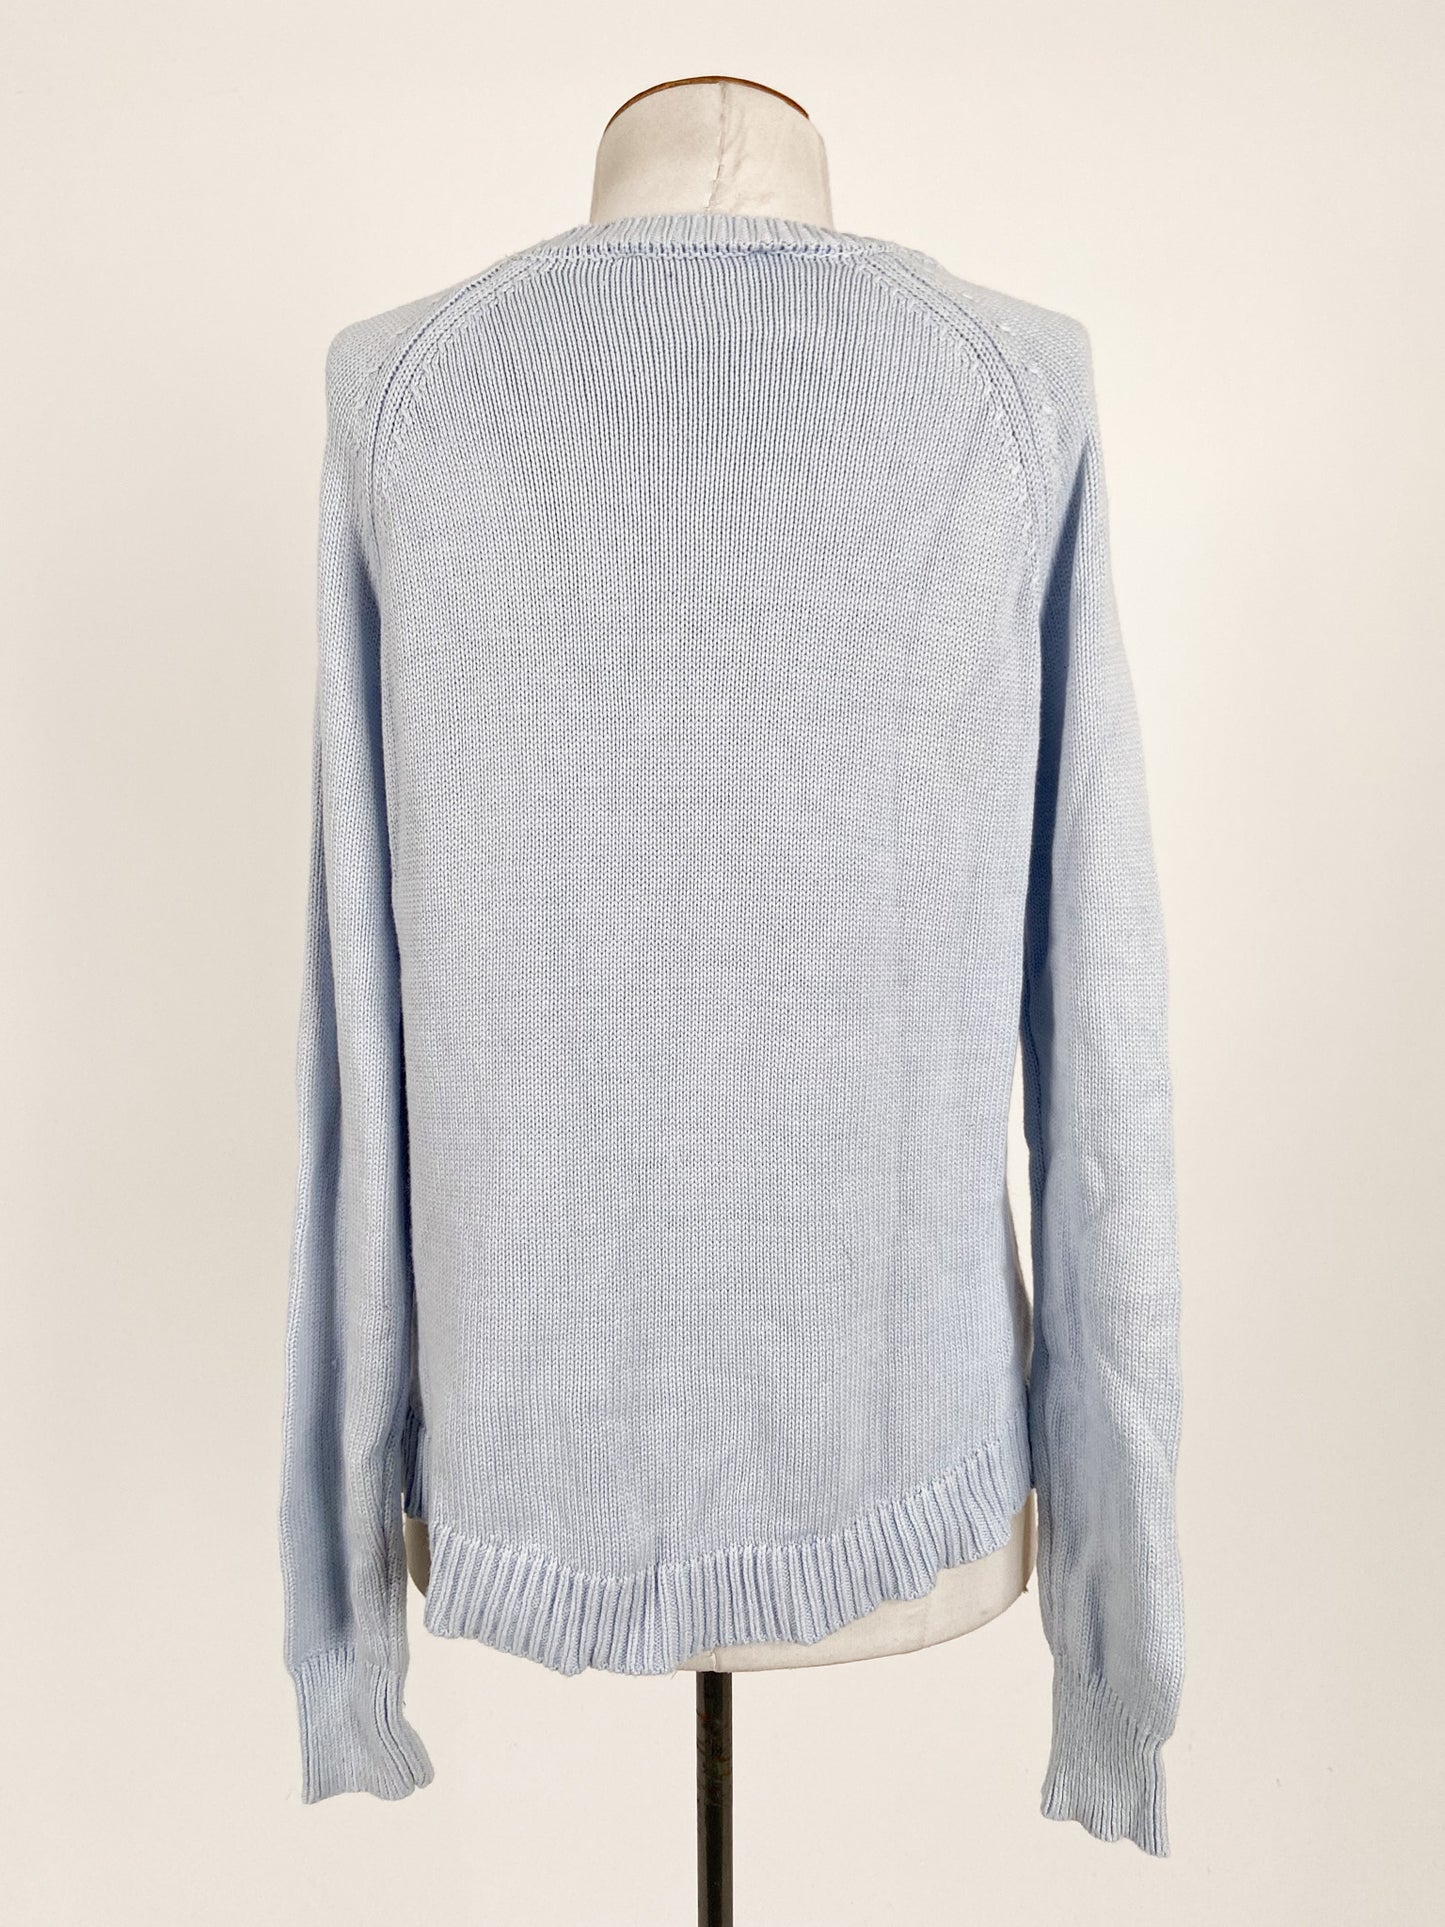 Just Jeans | Blue Casual Jumper | Size S